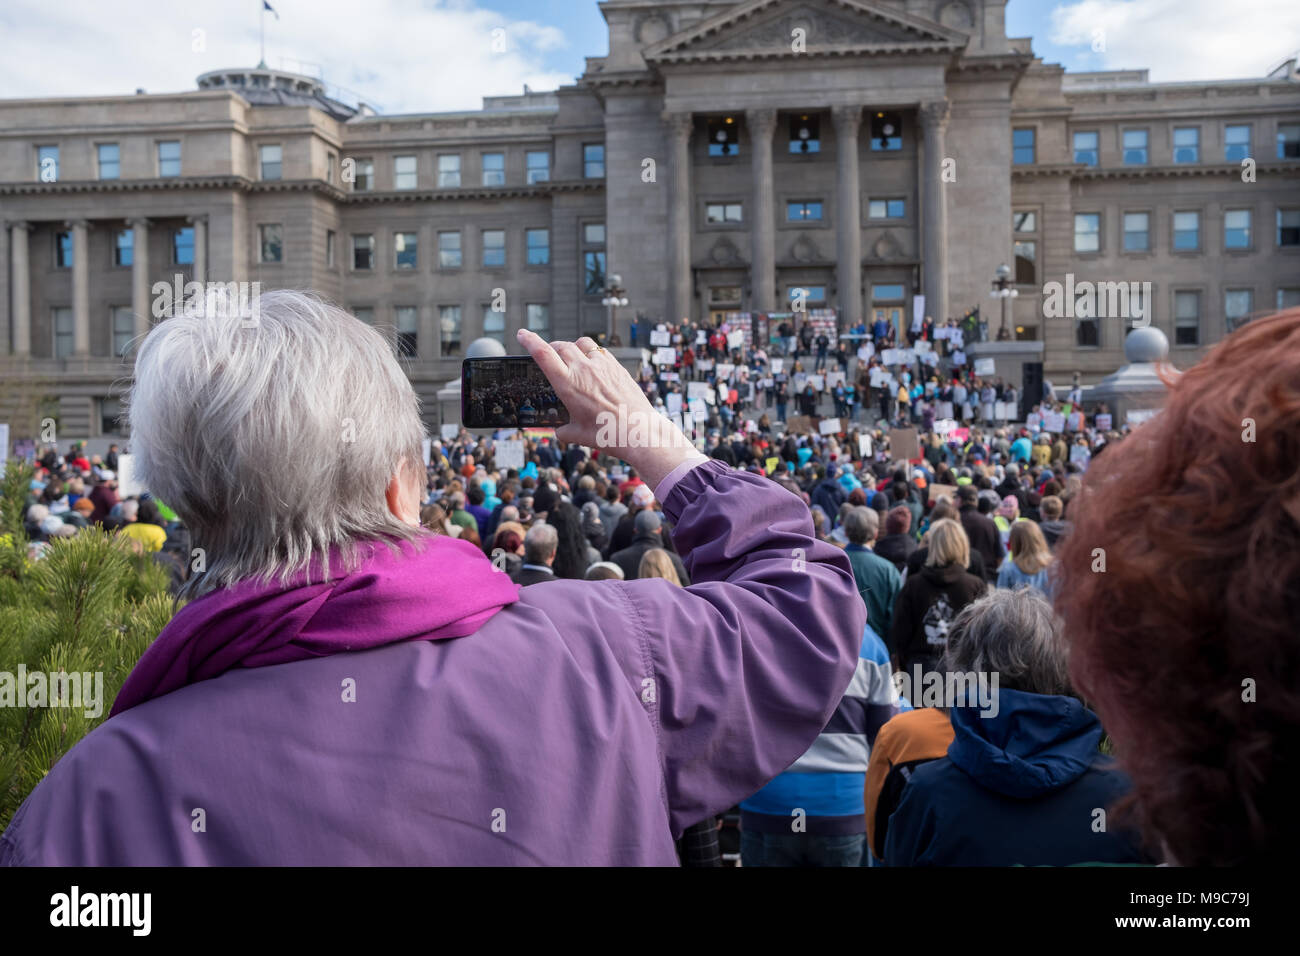 Idaho, USA, 24 Mar 2018. March For Our Lives demonstrators protest the lack of gun safety laws in the US. Credit: Pete Grady/Alamy Live News Stock Photo